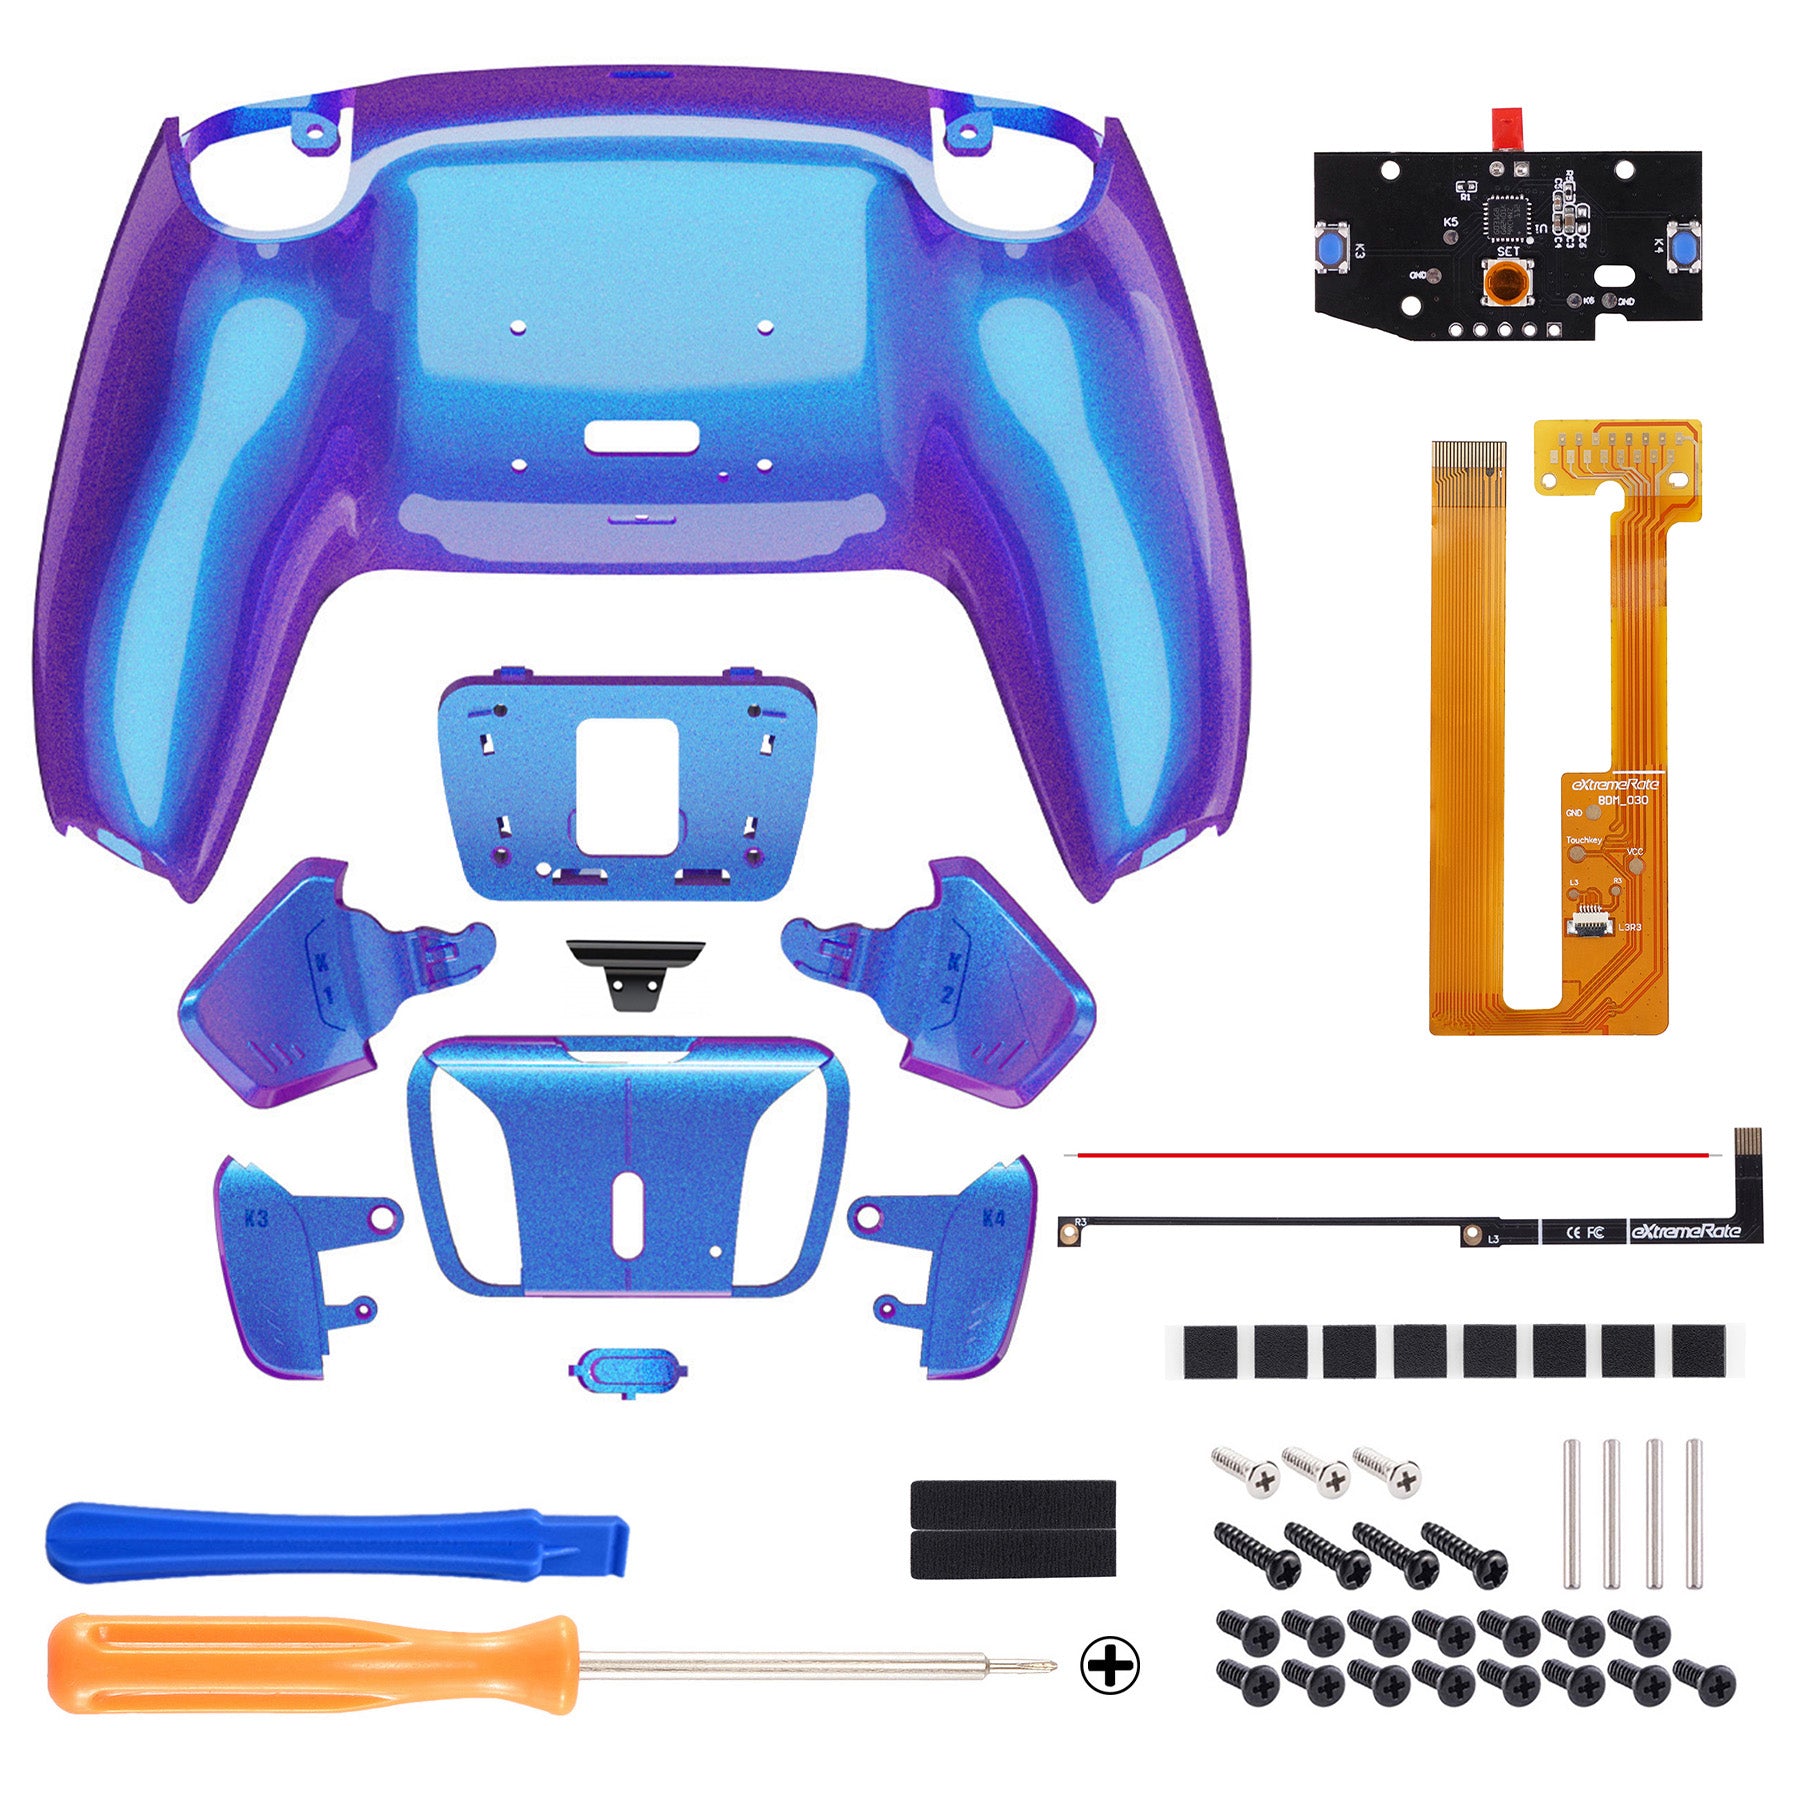 eXtremeRate Remappable RISE 4.0 Remap Kit for PS5 Controller BDM-030/040 - Chameleon Purple Blue eXtremeRate